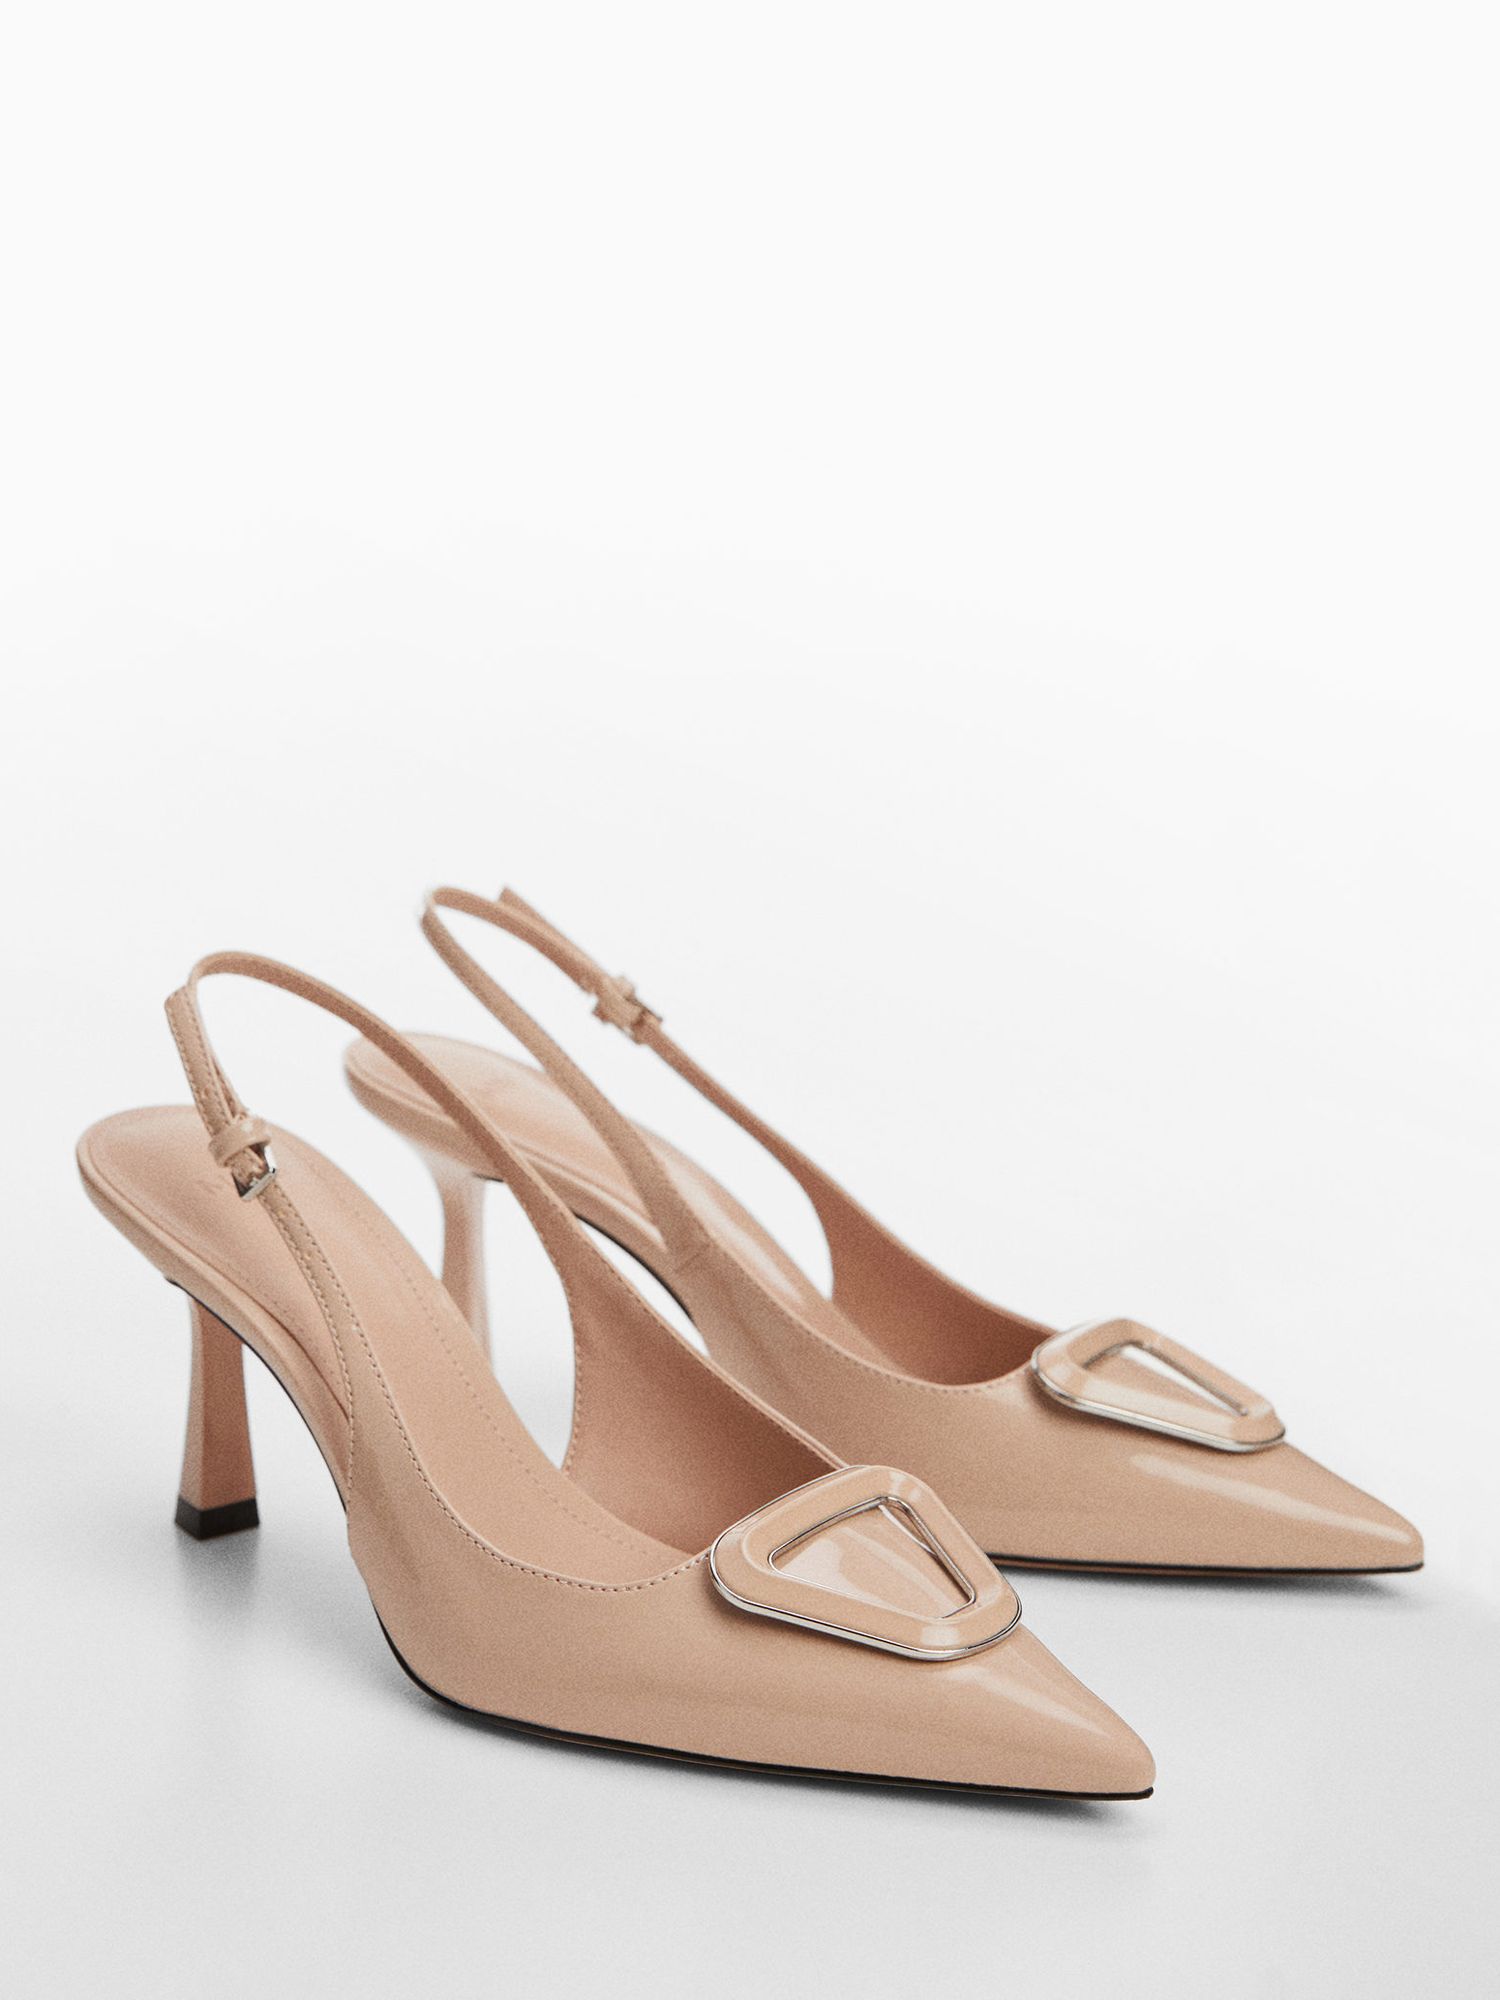 Buy Mango Franie Patent Leather Slingback Heel Shoes Online at johnlewis.com